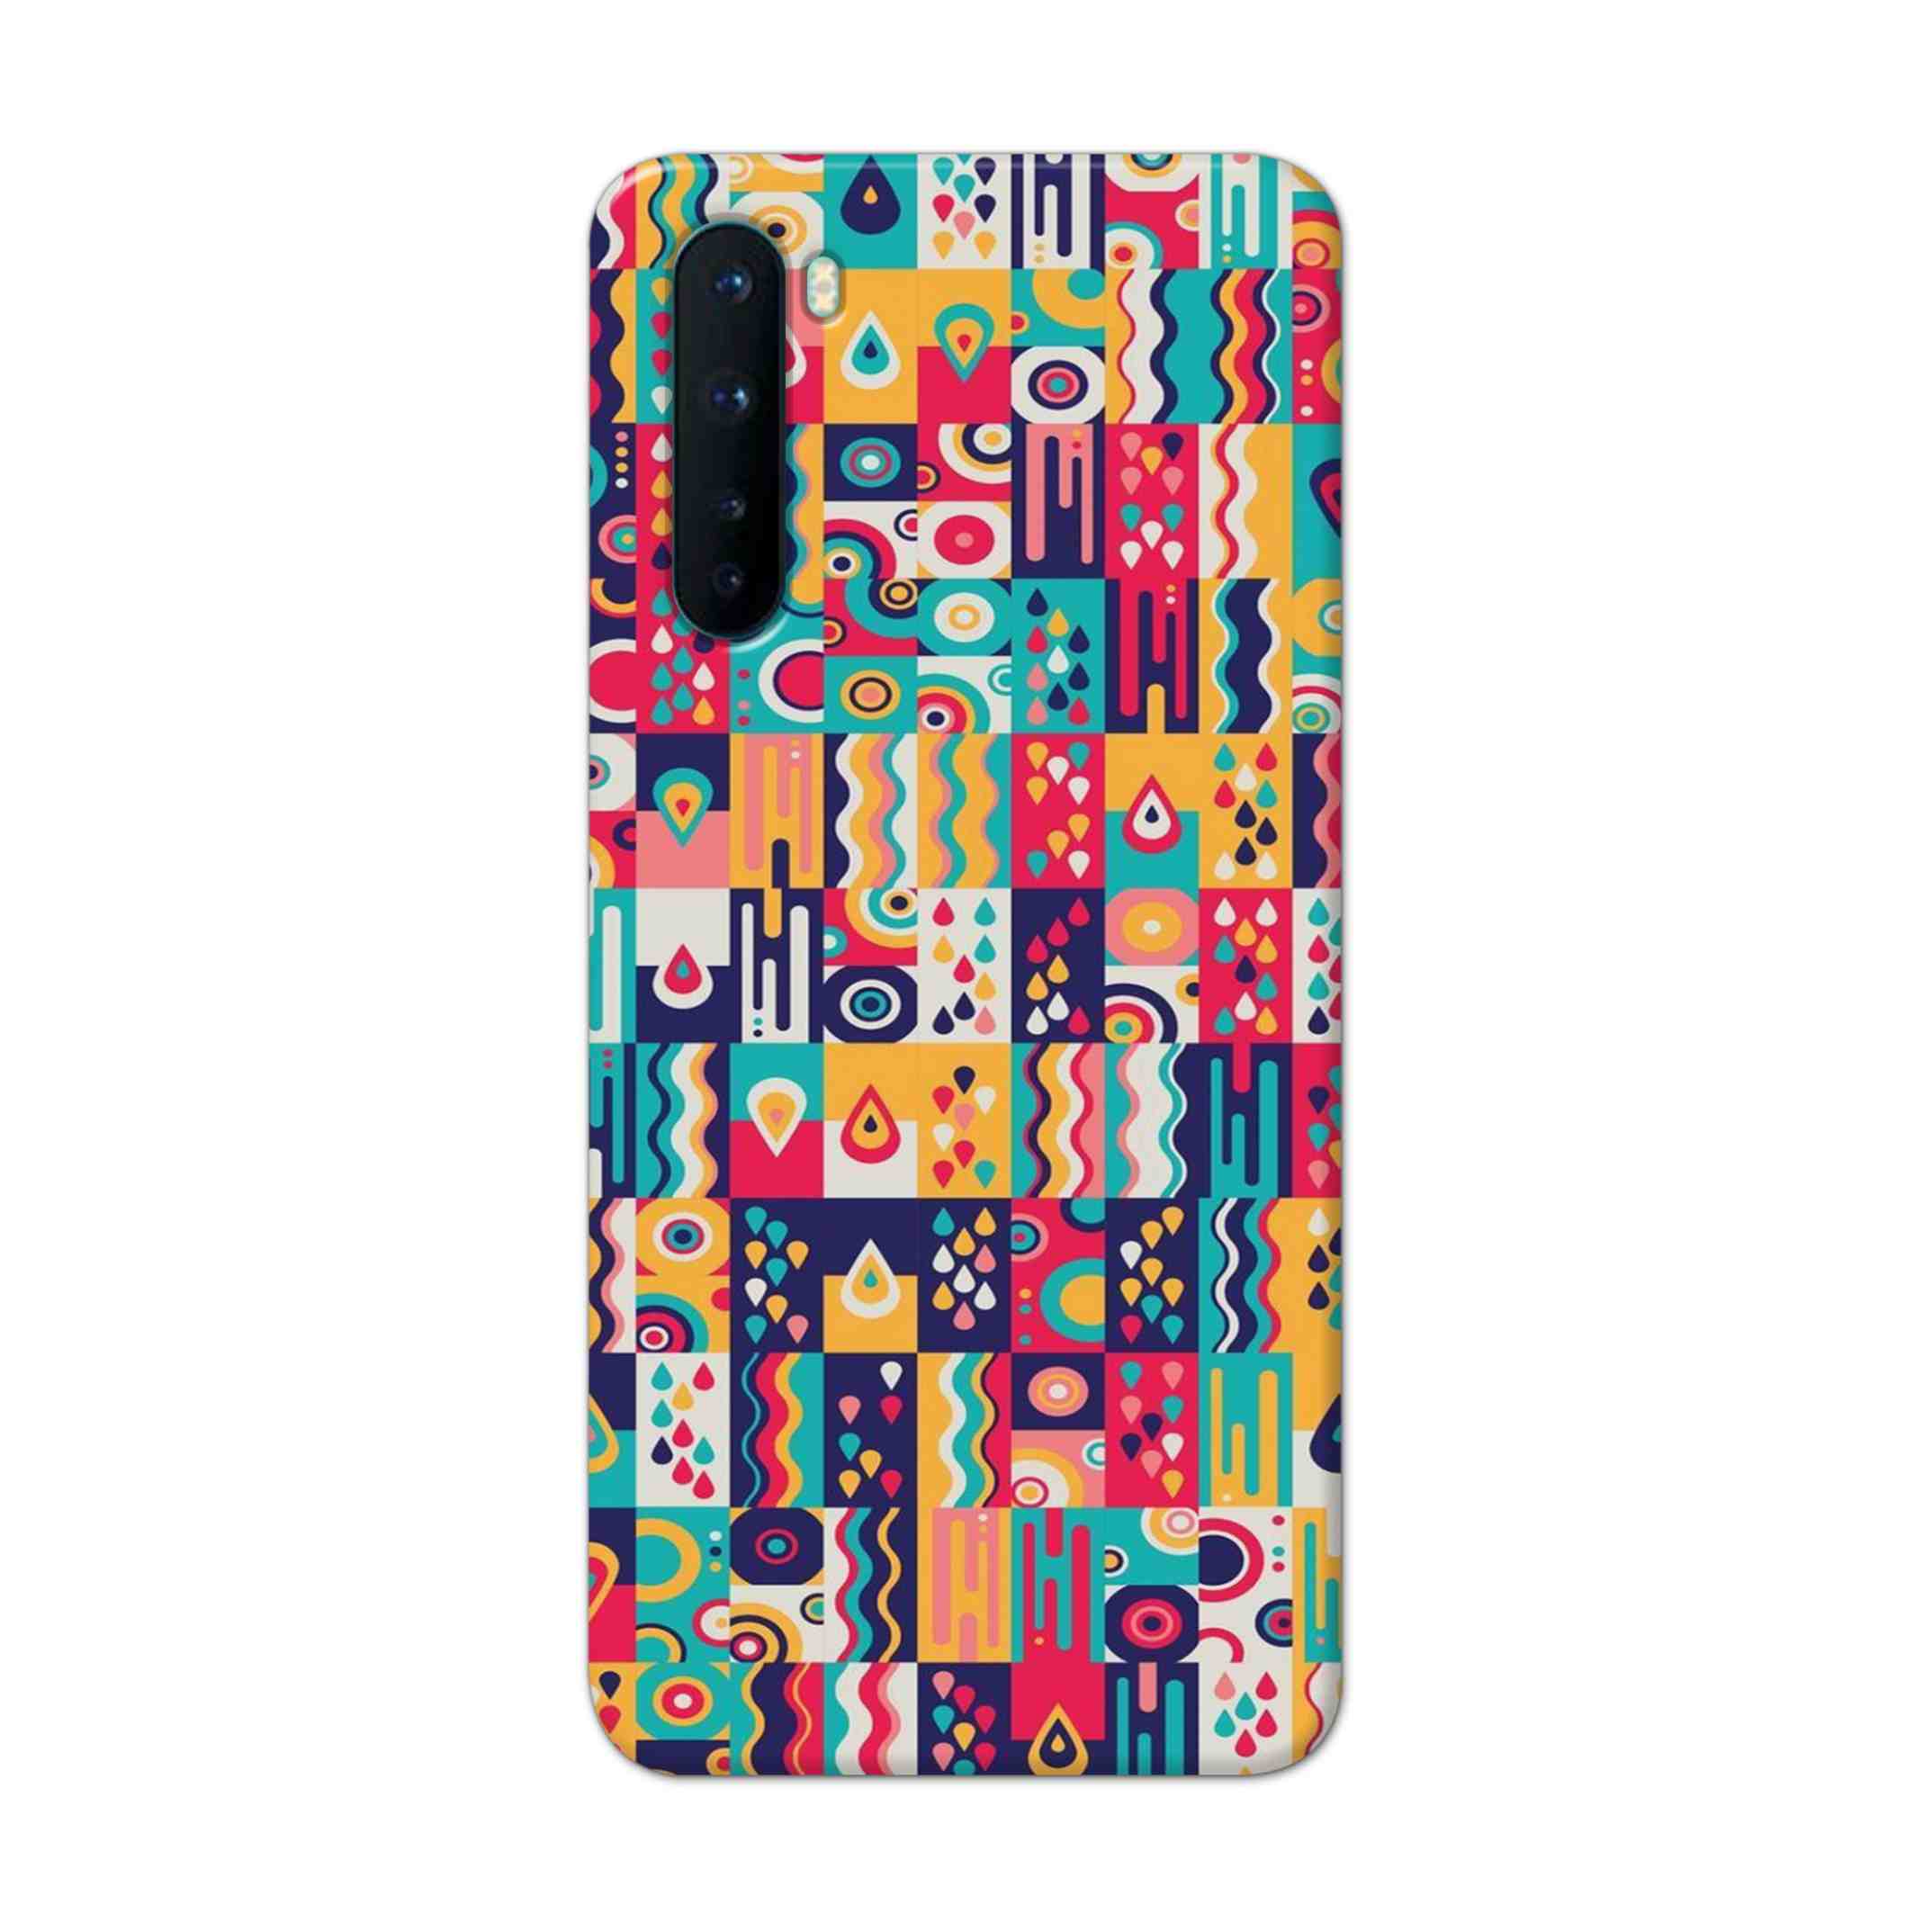 Buy Art Hard Back Mobile Phone Case Cover For OnePlus Nord Online